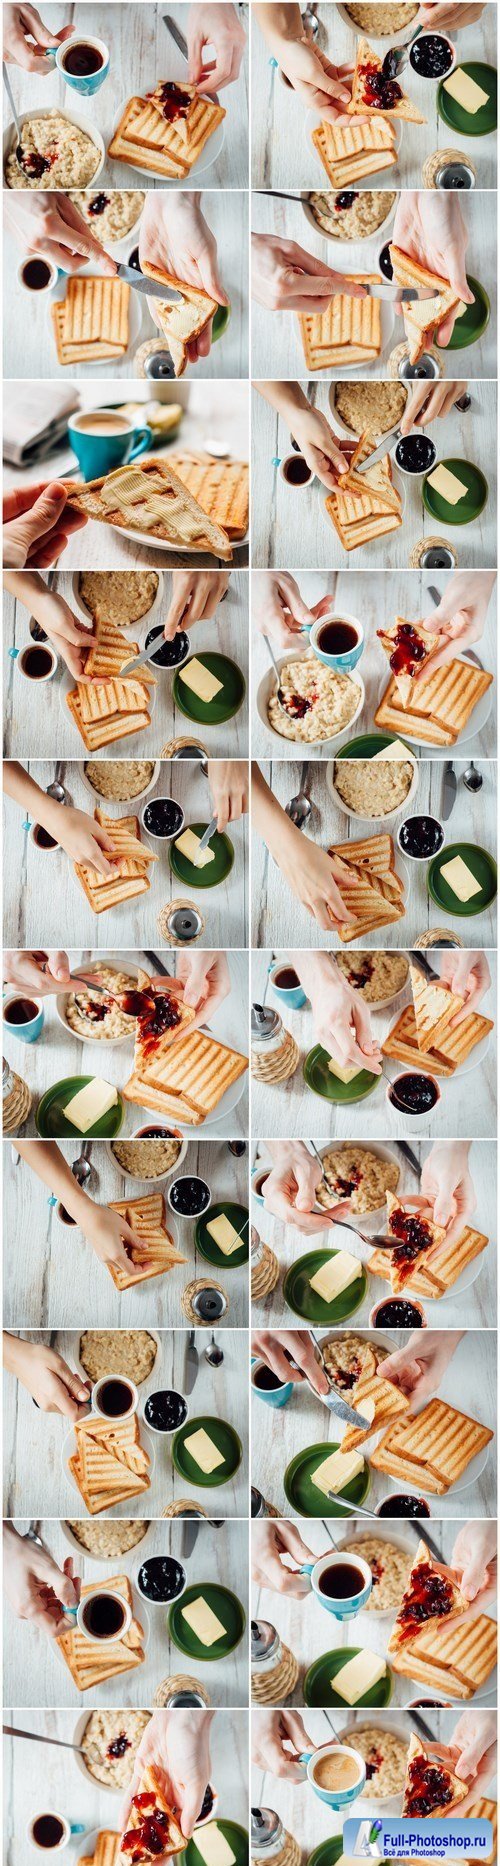 Breakfast with coffee, toasts, butter and jam 2 - 20xUHQ JPEG Professional Stock Images